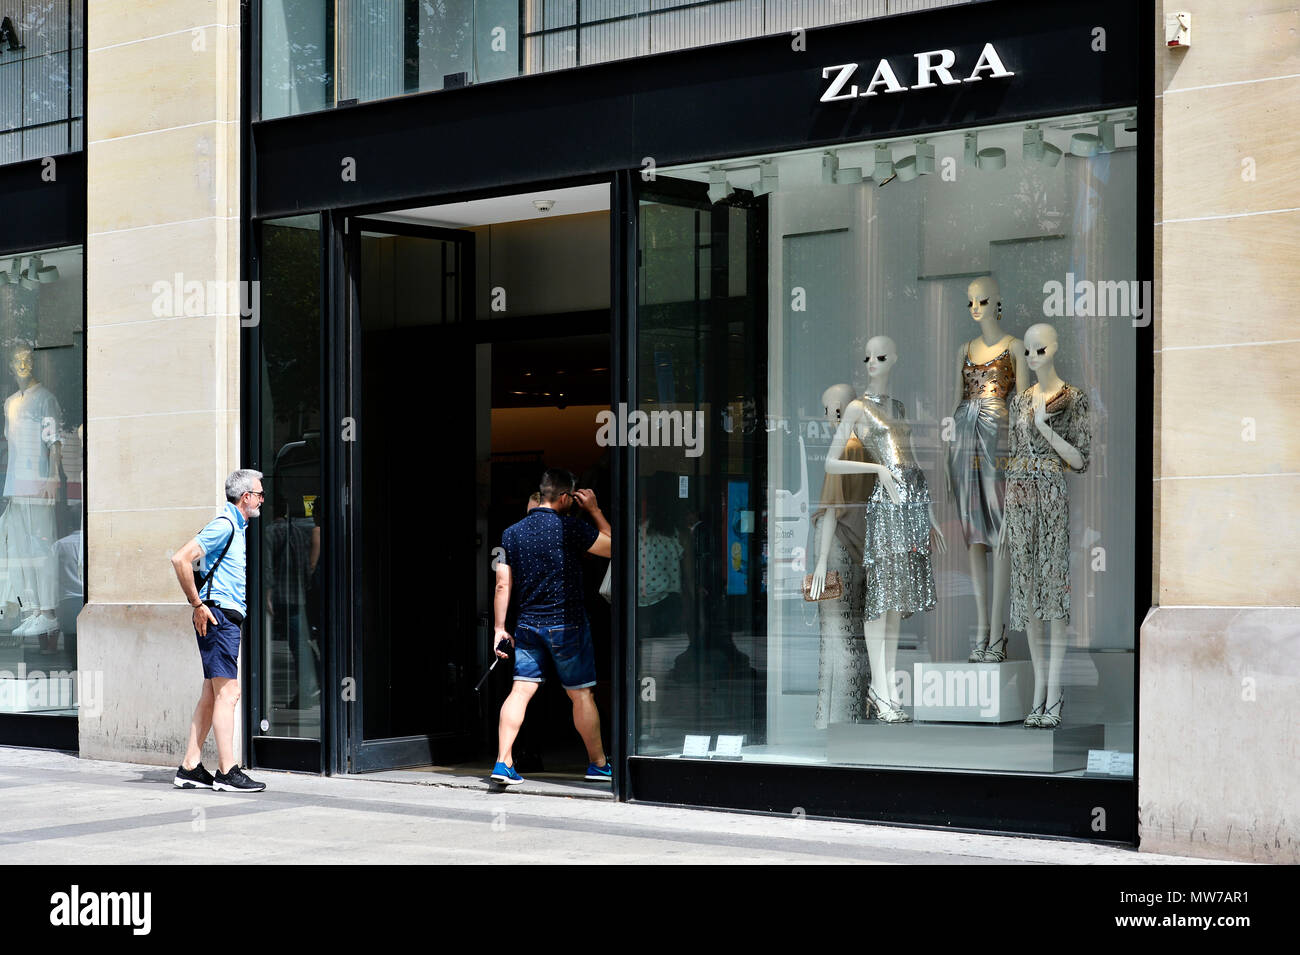 Zara Store Paris High Resolution Stock Photography and Images - Alamy